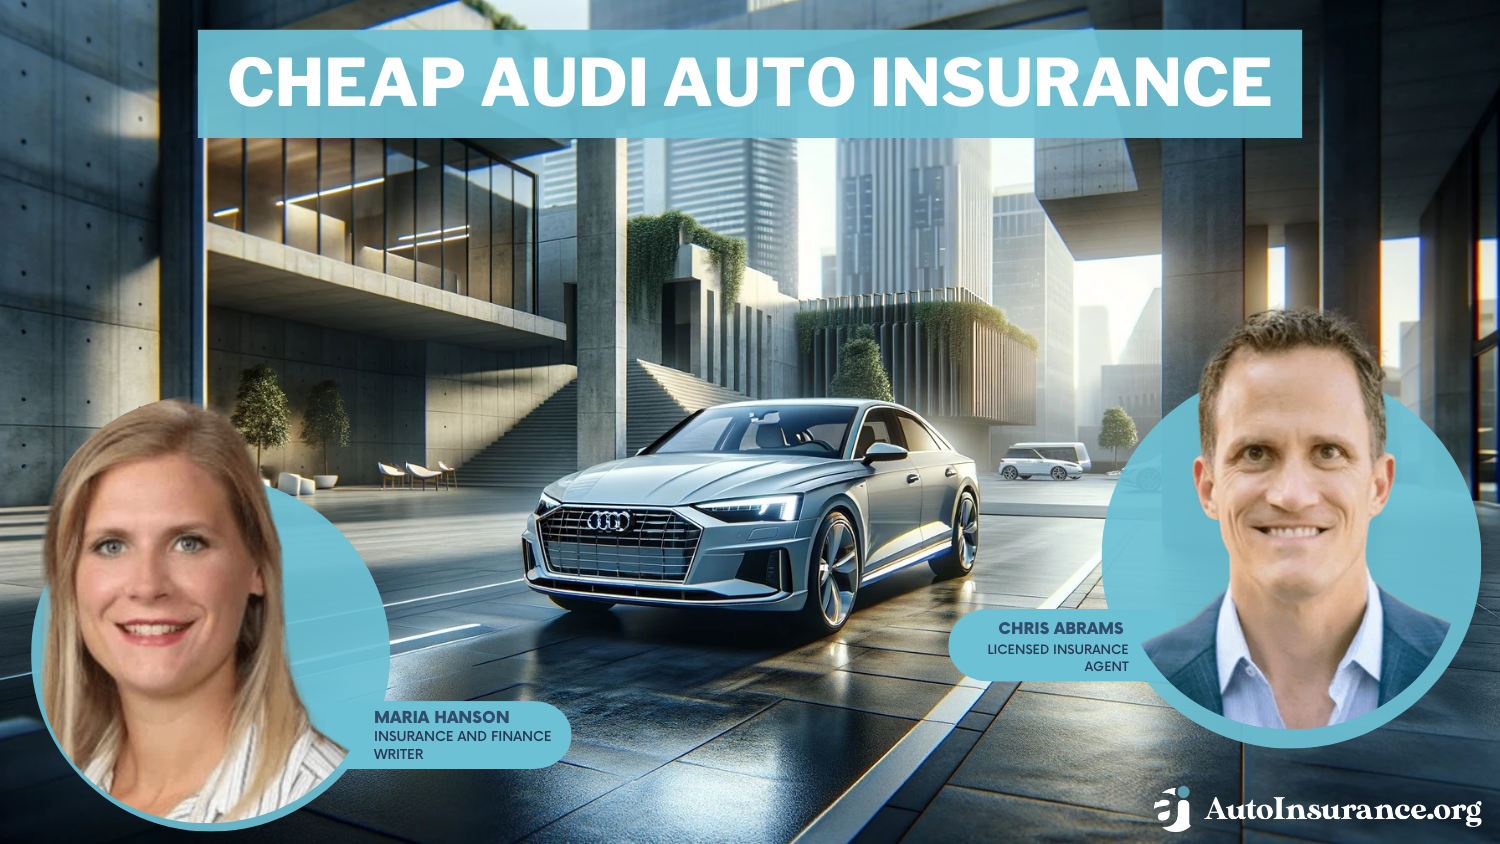 Erie, AAA, and State Farm, cheap Audi auto insurance